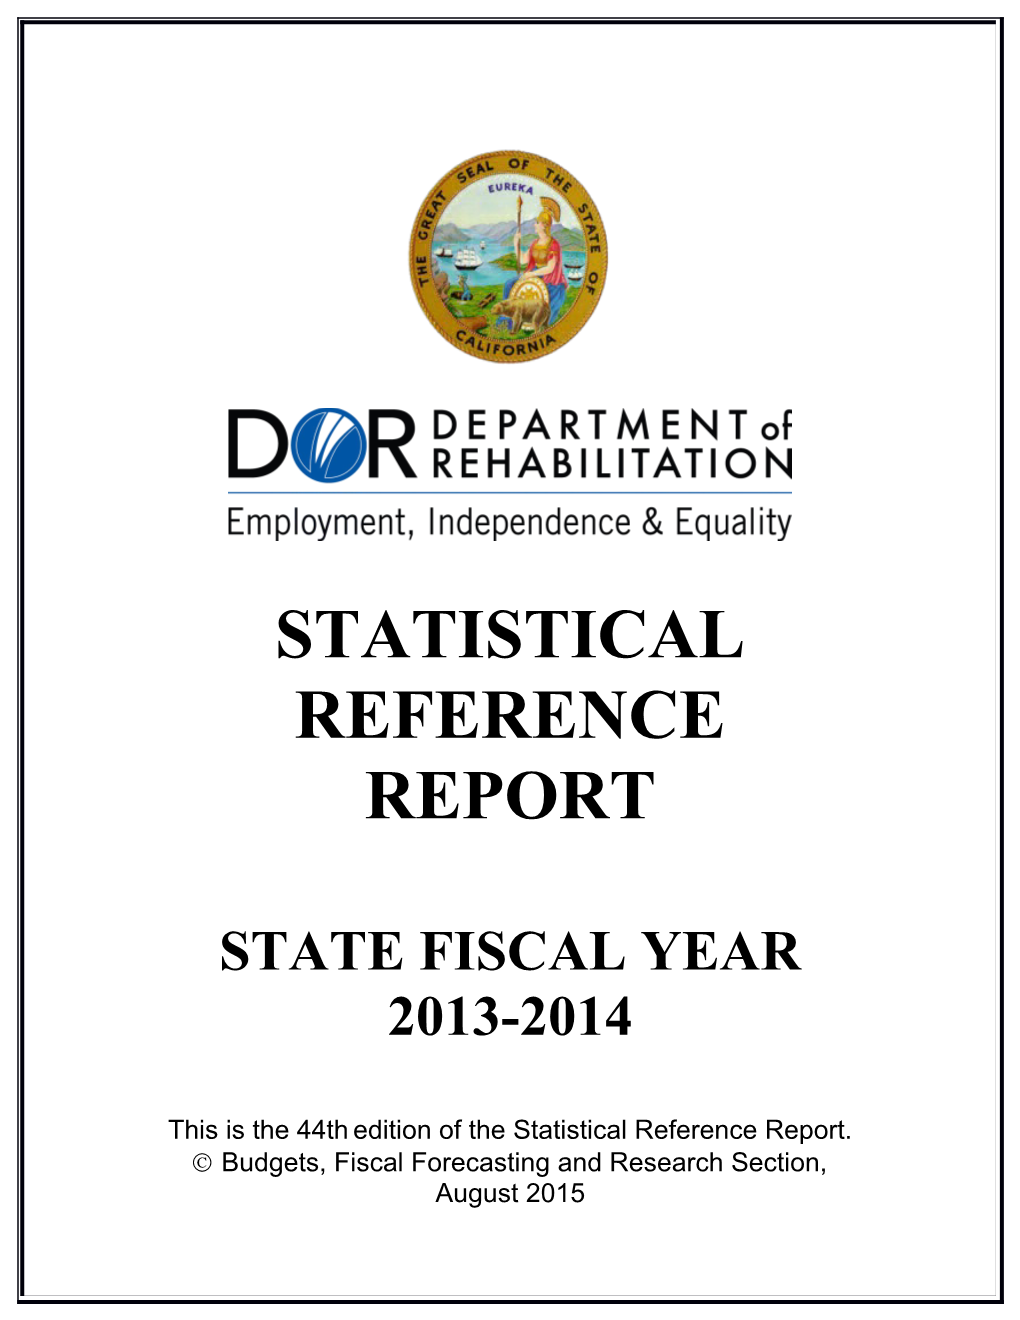 This Is the 44Thedition of the Statistical Reference Report